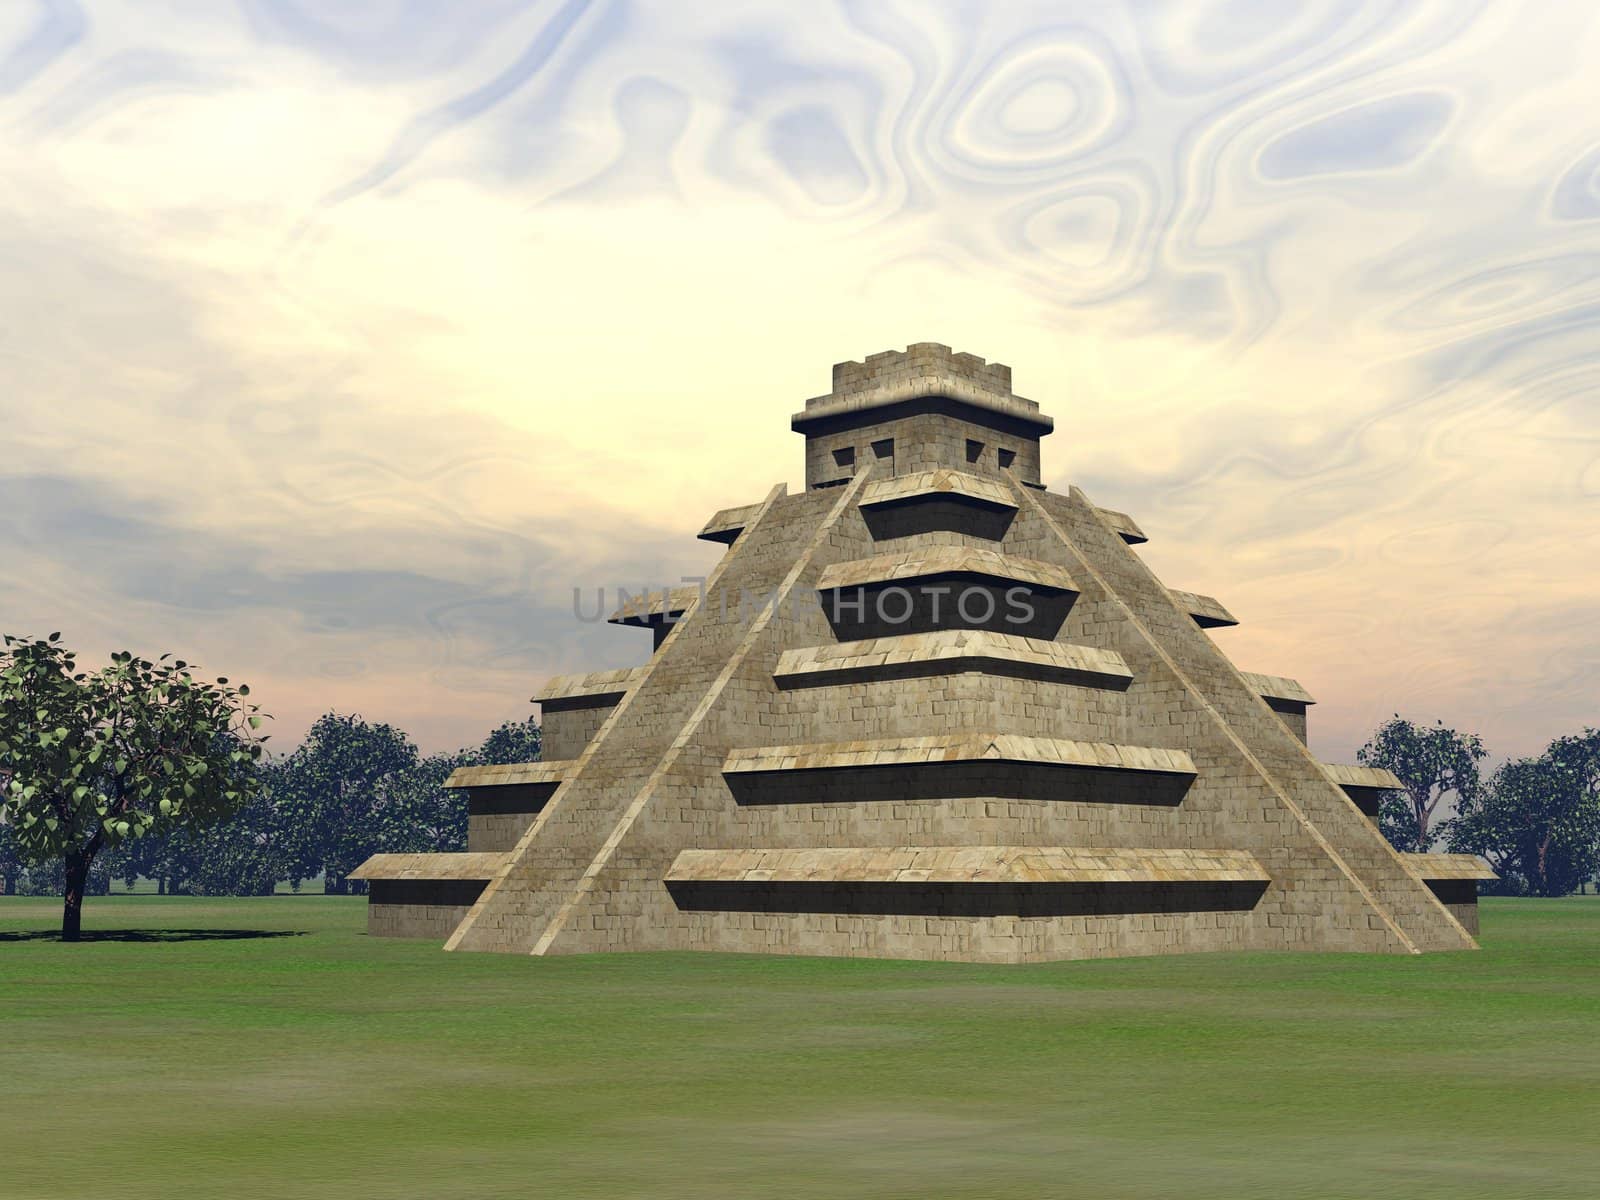 Maya pyramid on green grass and surrounded with trees by sunset light